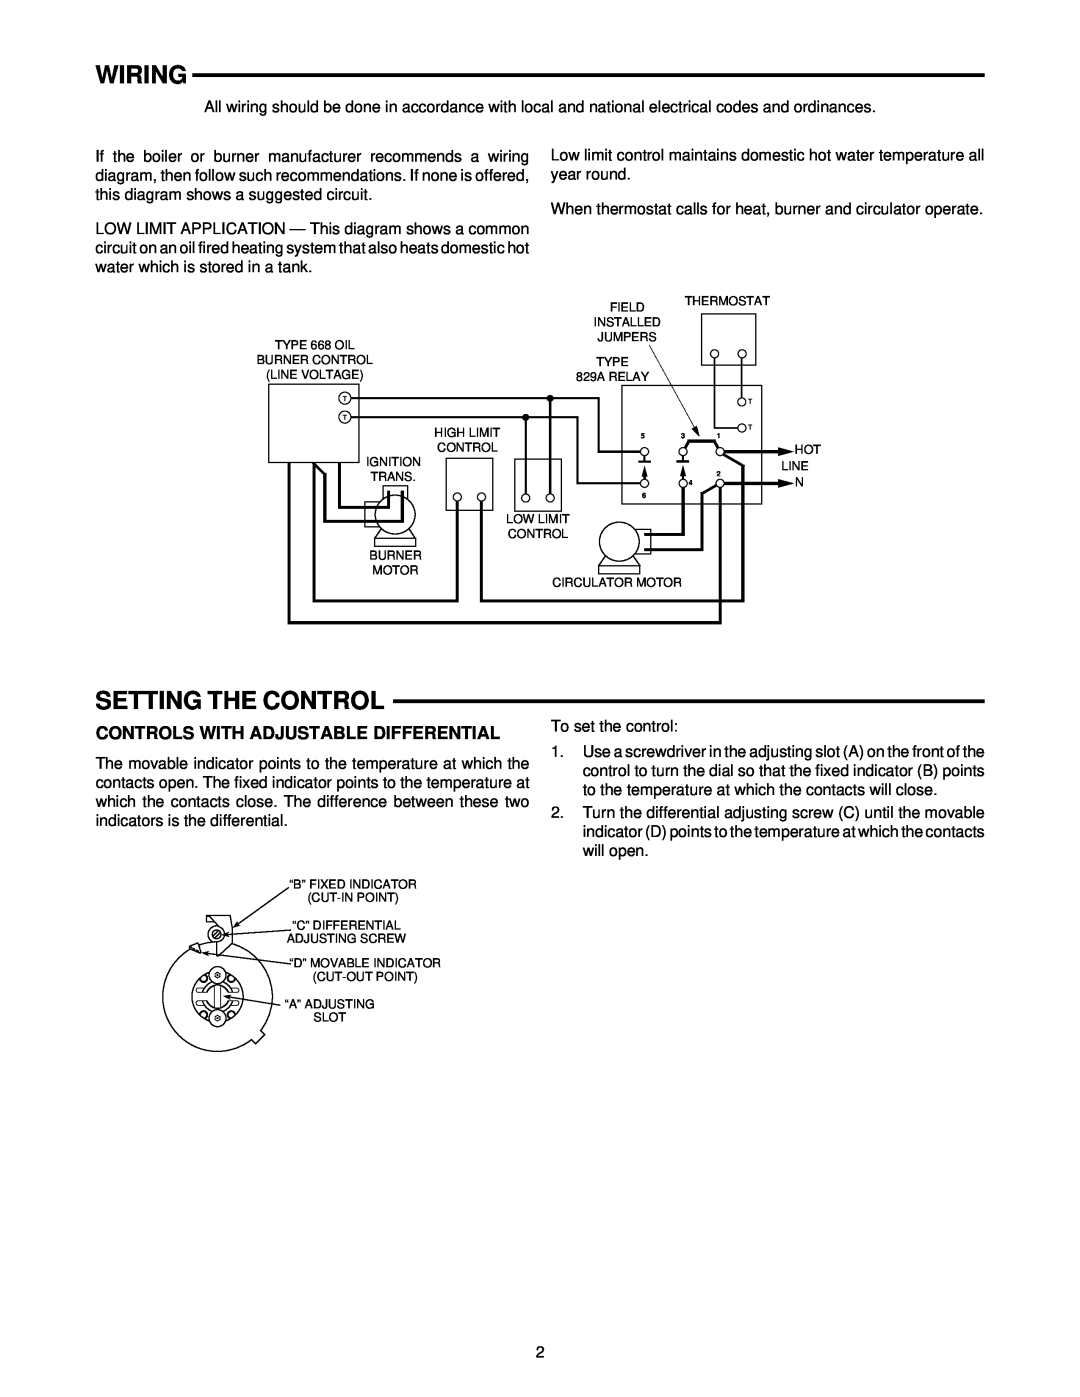 White Rodgers 1145 installation instructions Wiring, Setting The Control, Controls With Adjustable Differential 